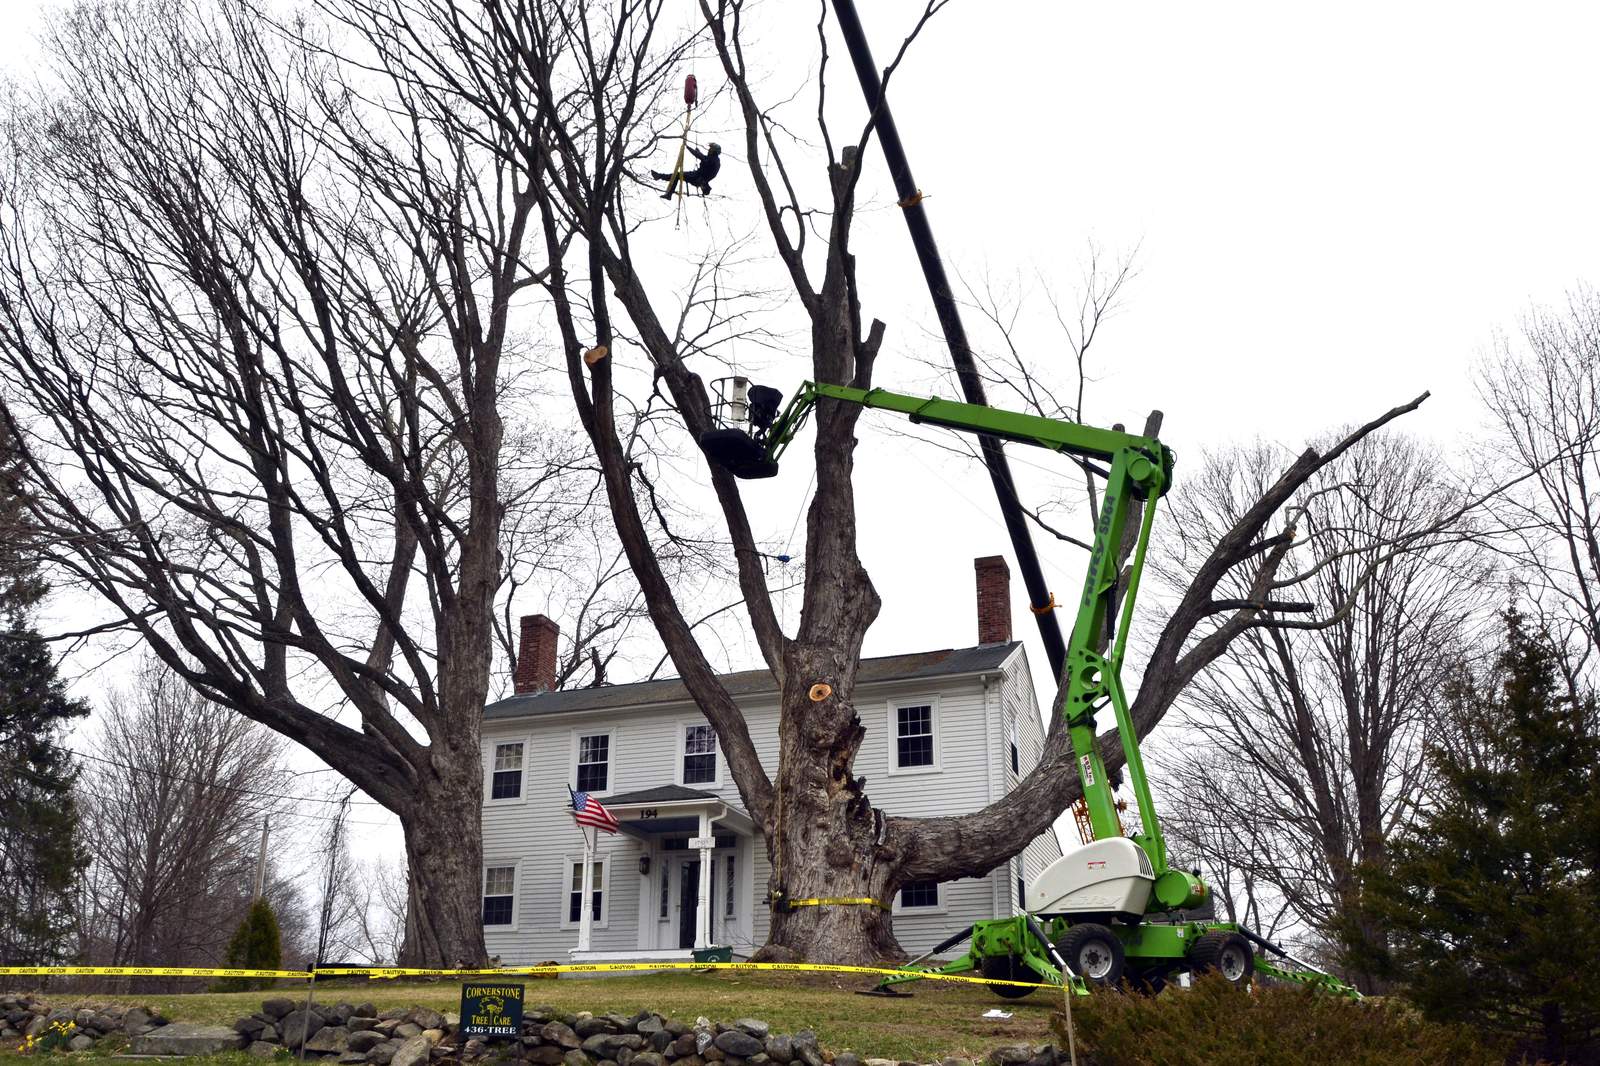 Safety concerns bring down largest sugar maple tree in US